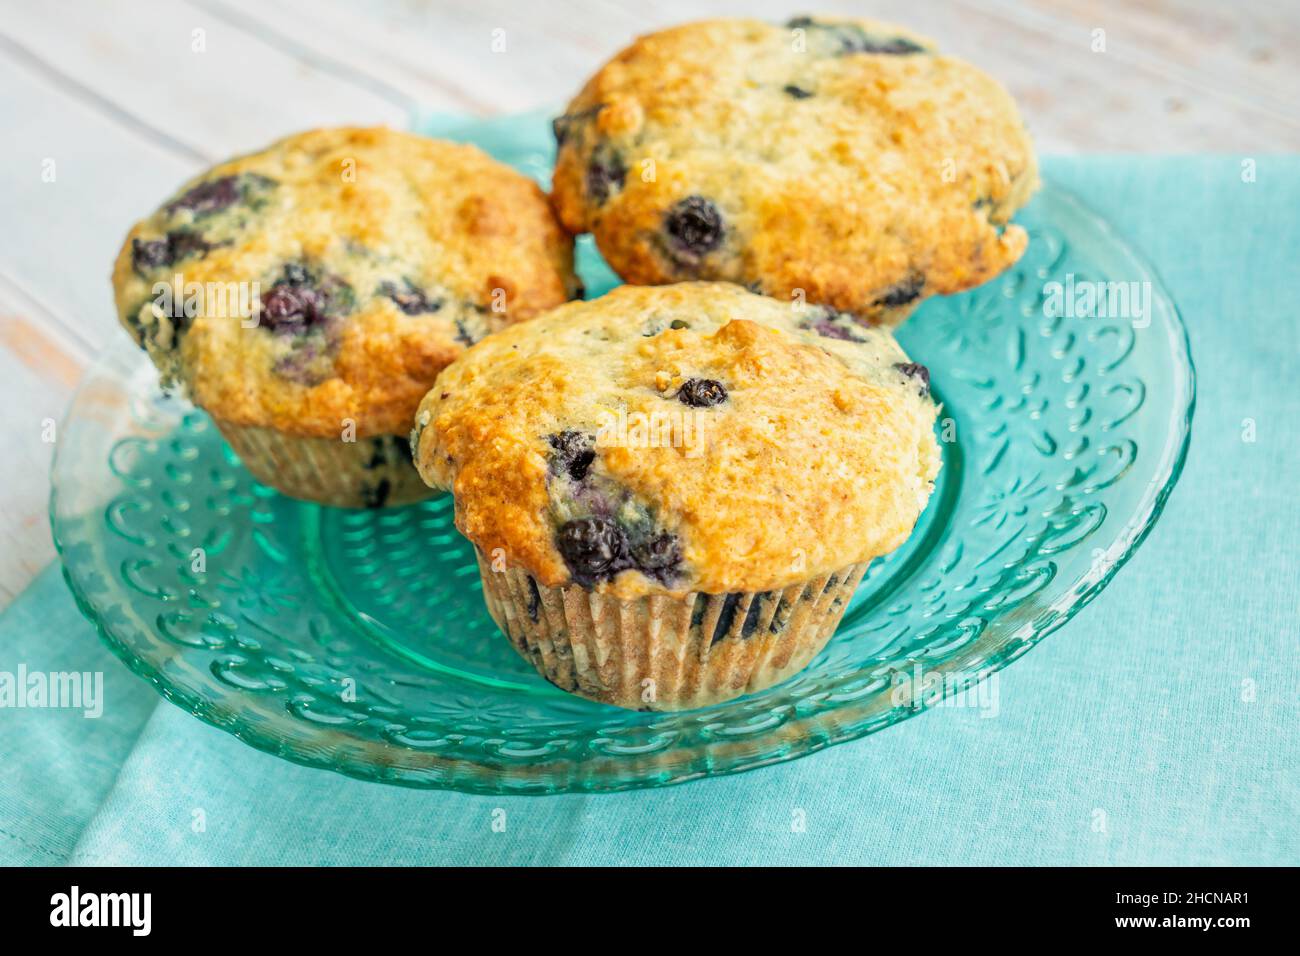 Homemade blueberry muffins on a teal glass plate. Stock Photo